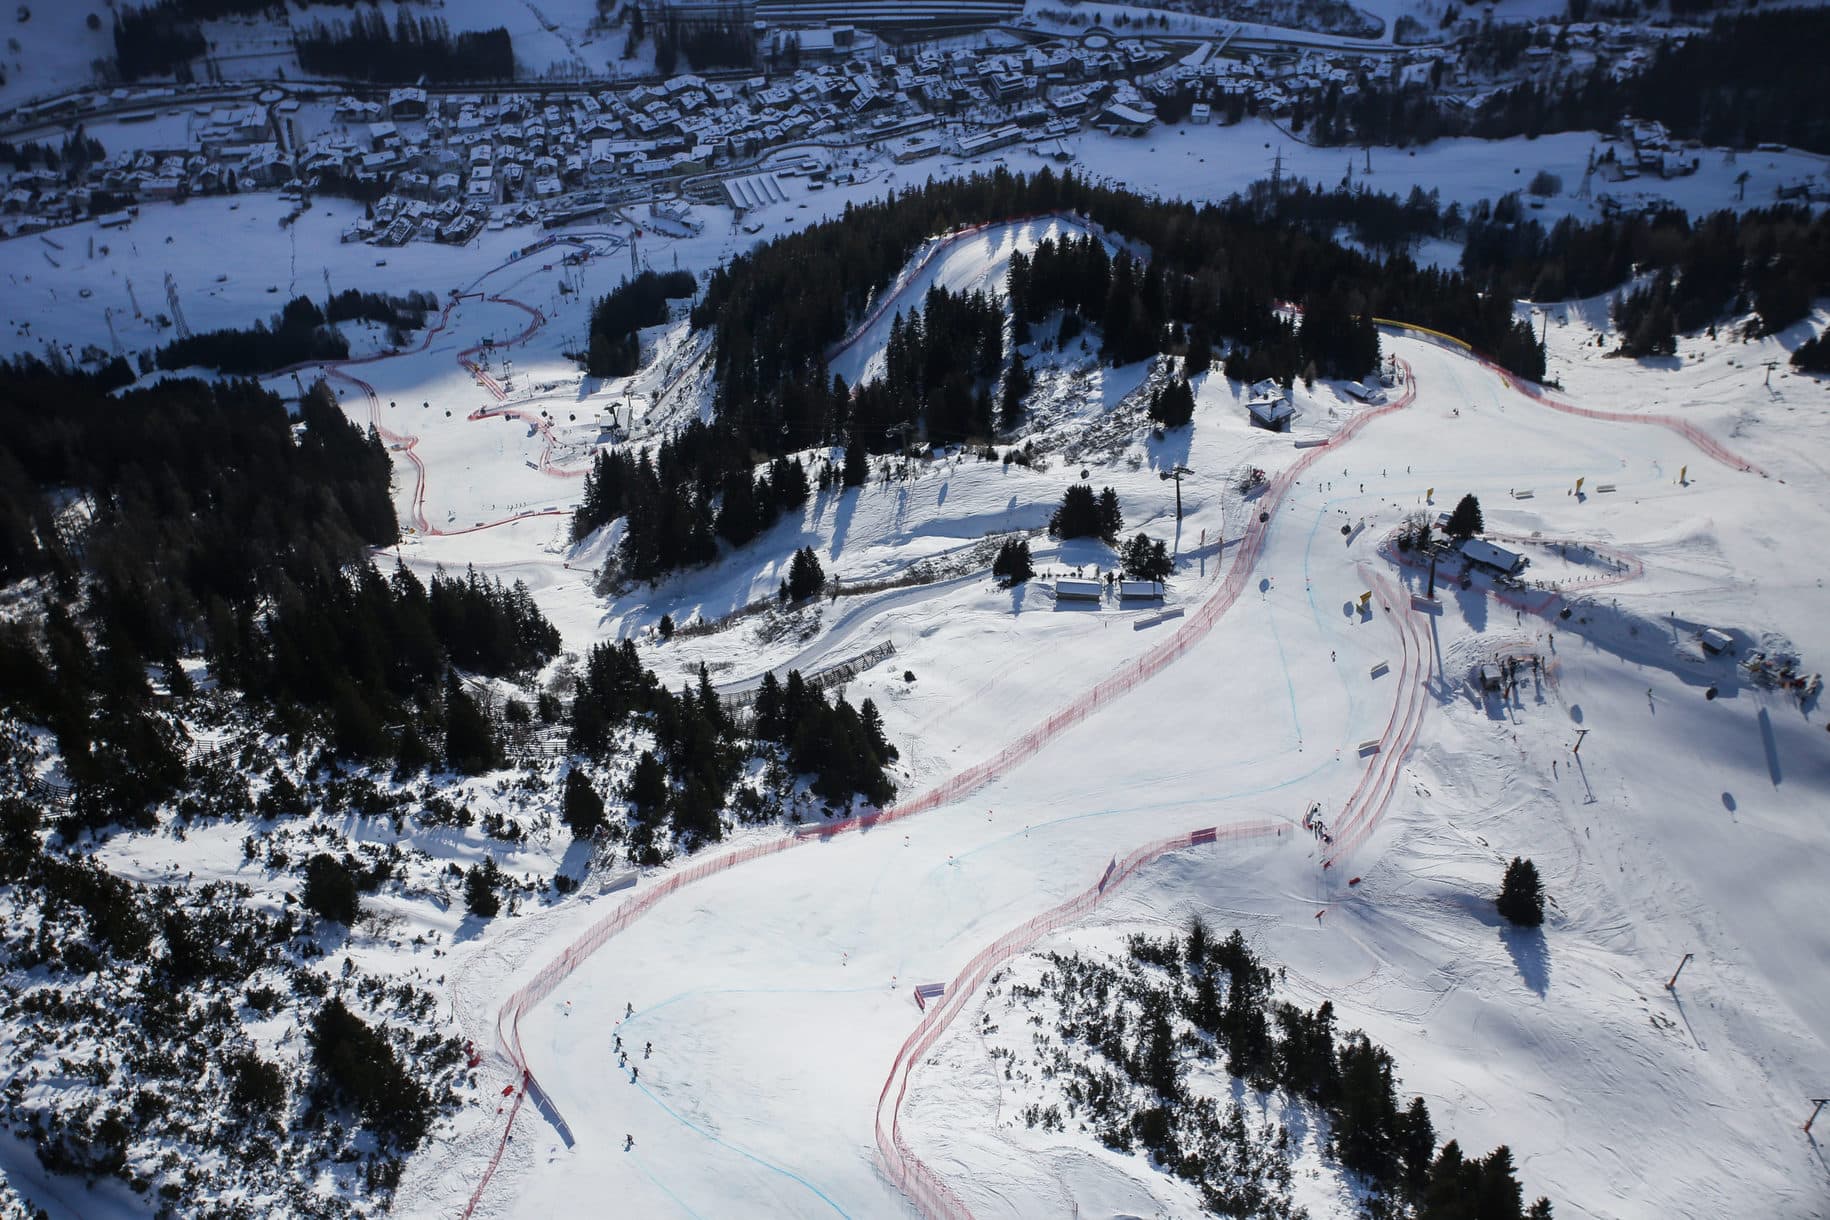 SANKT ANTON,AUSTRIA,09.JAN.21 - ALPINE SKIING - FIS World Cup, downhill, ladies. Image shows an overview of the track. Photo: GEPA pictures/ Daniel Goetzhaber